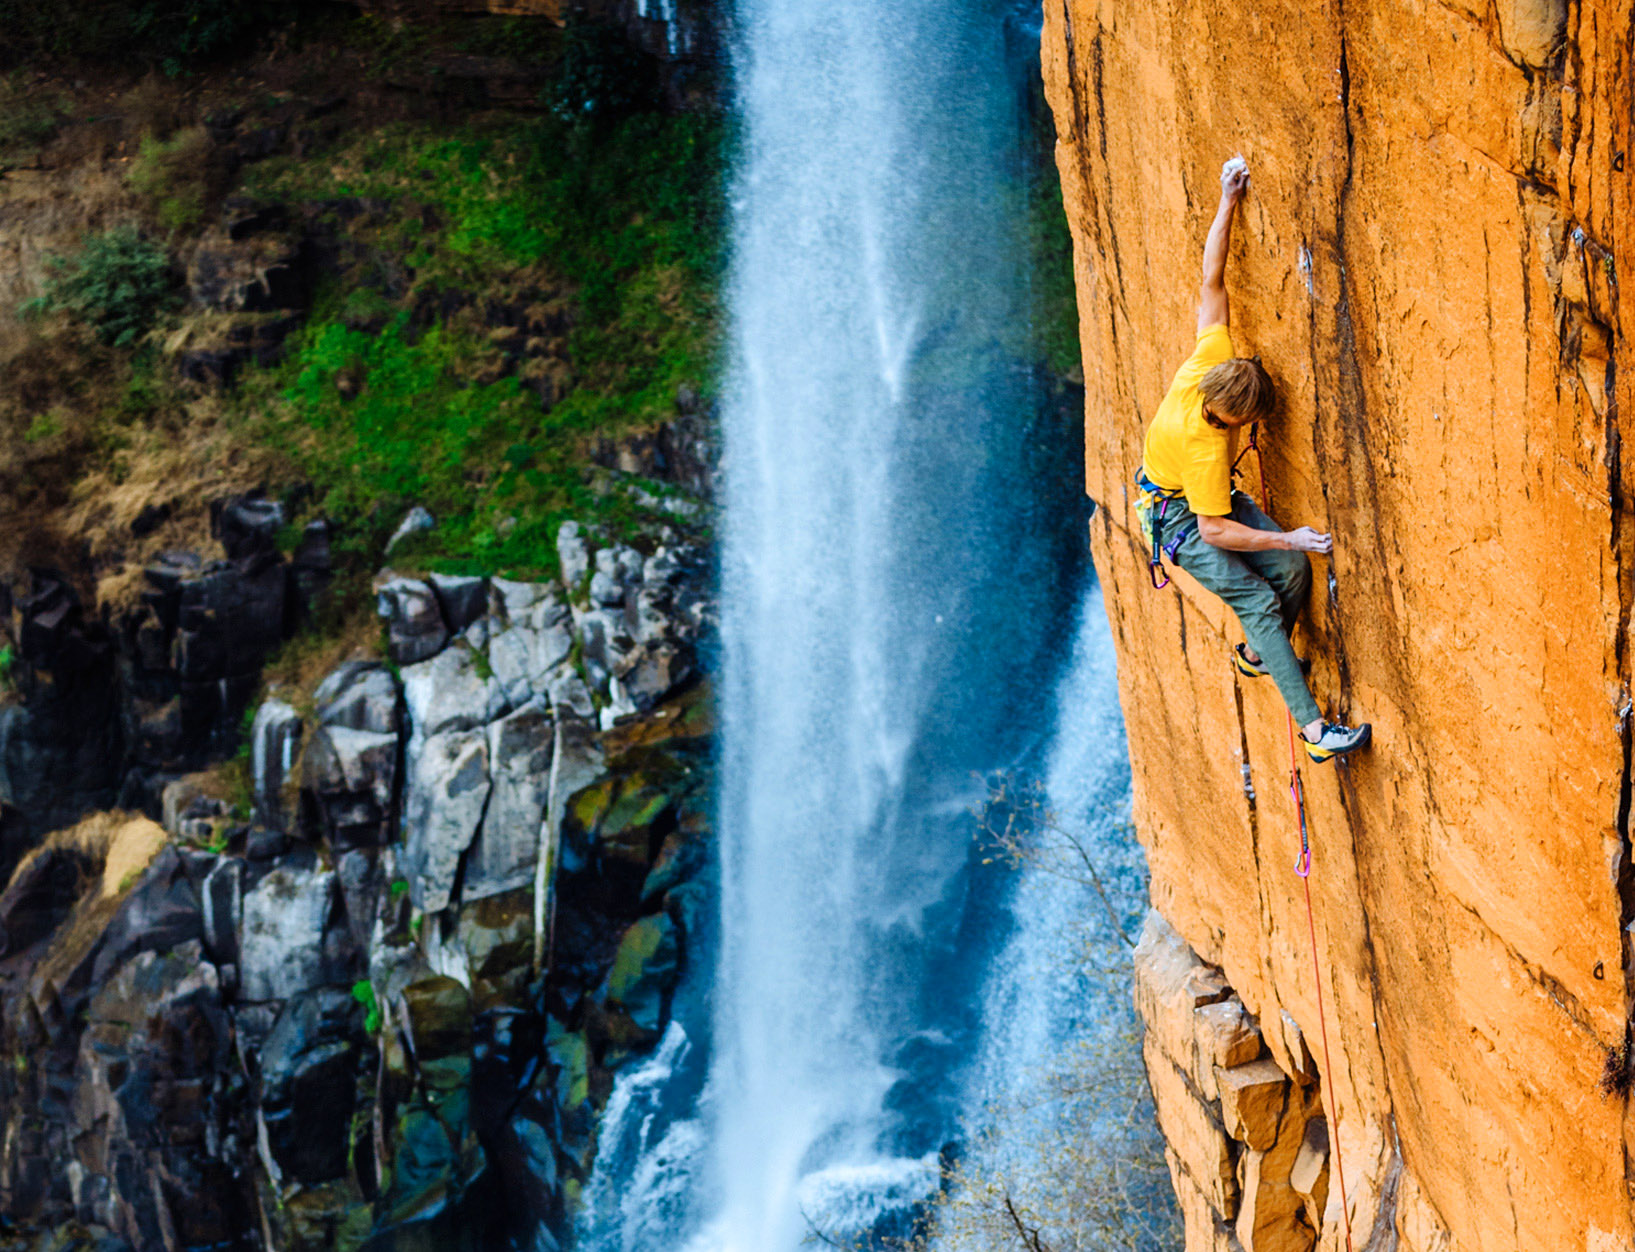 Alex Megos - Satan´s Temple 29/7c+ - Waterval Boven, South Africa